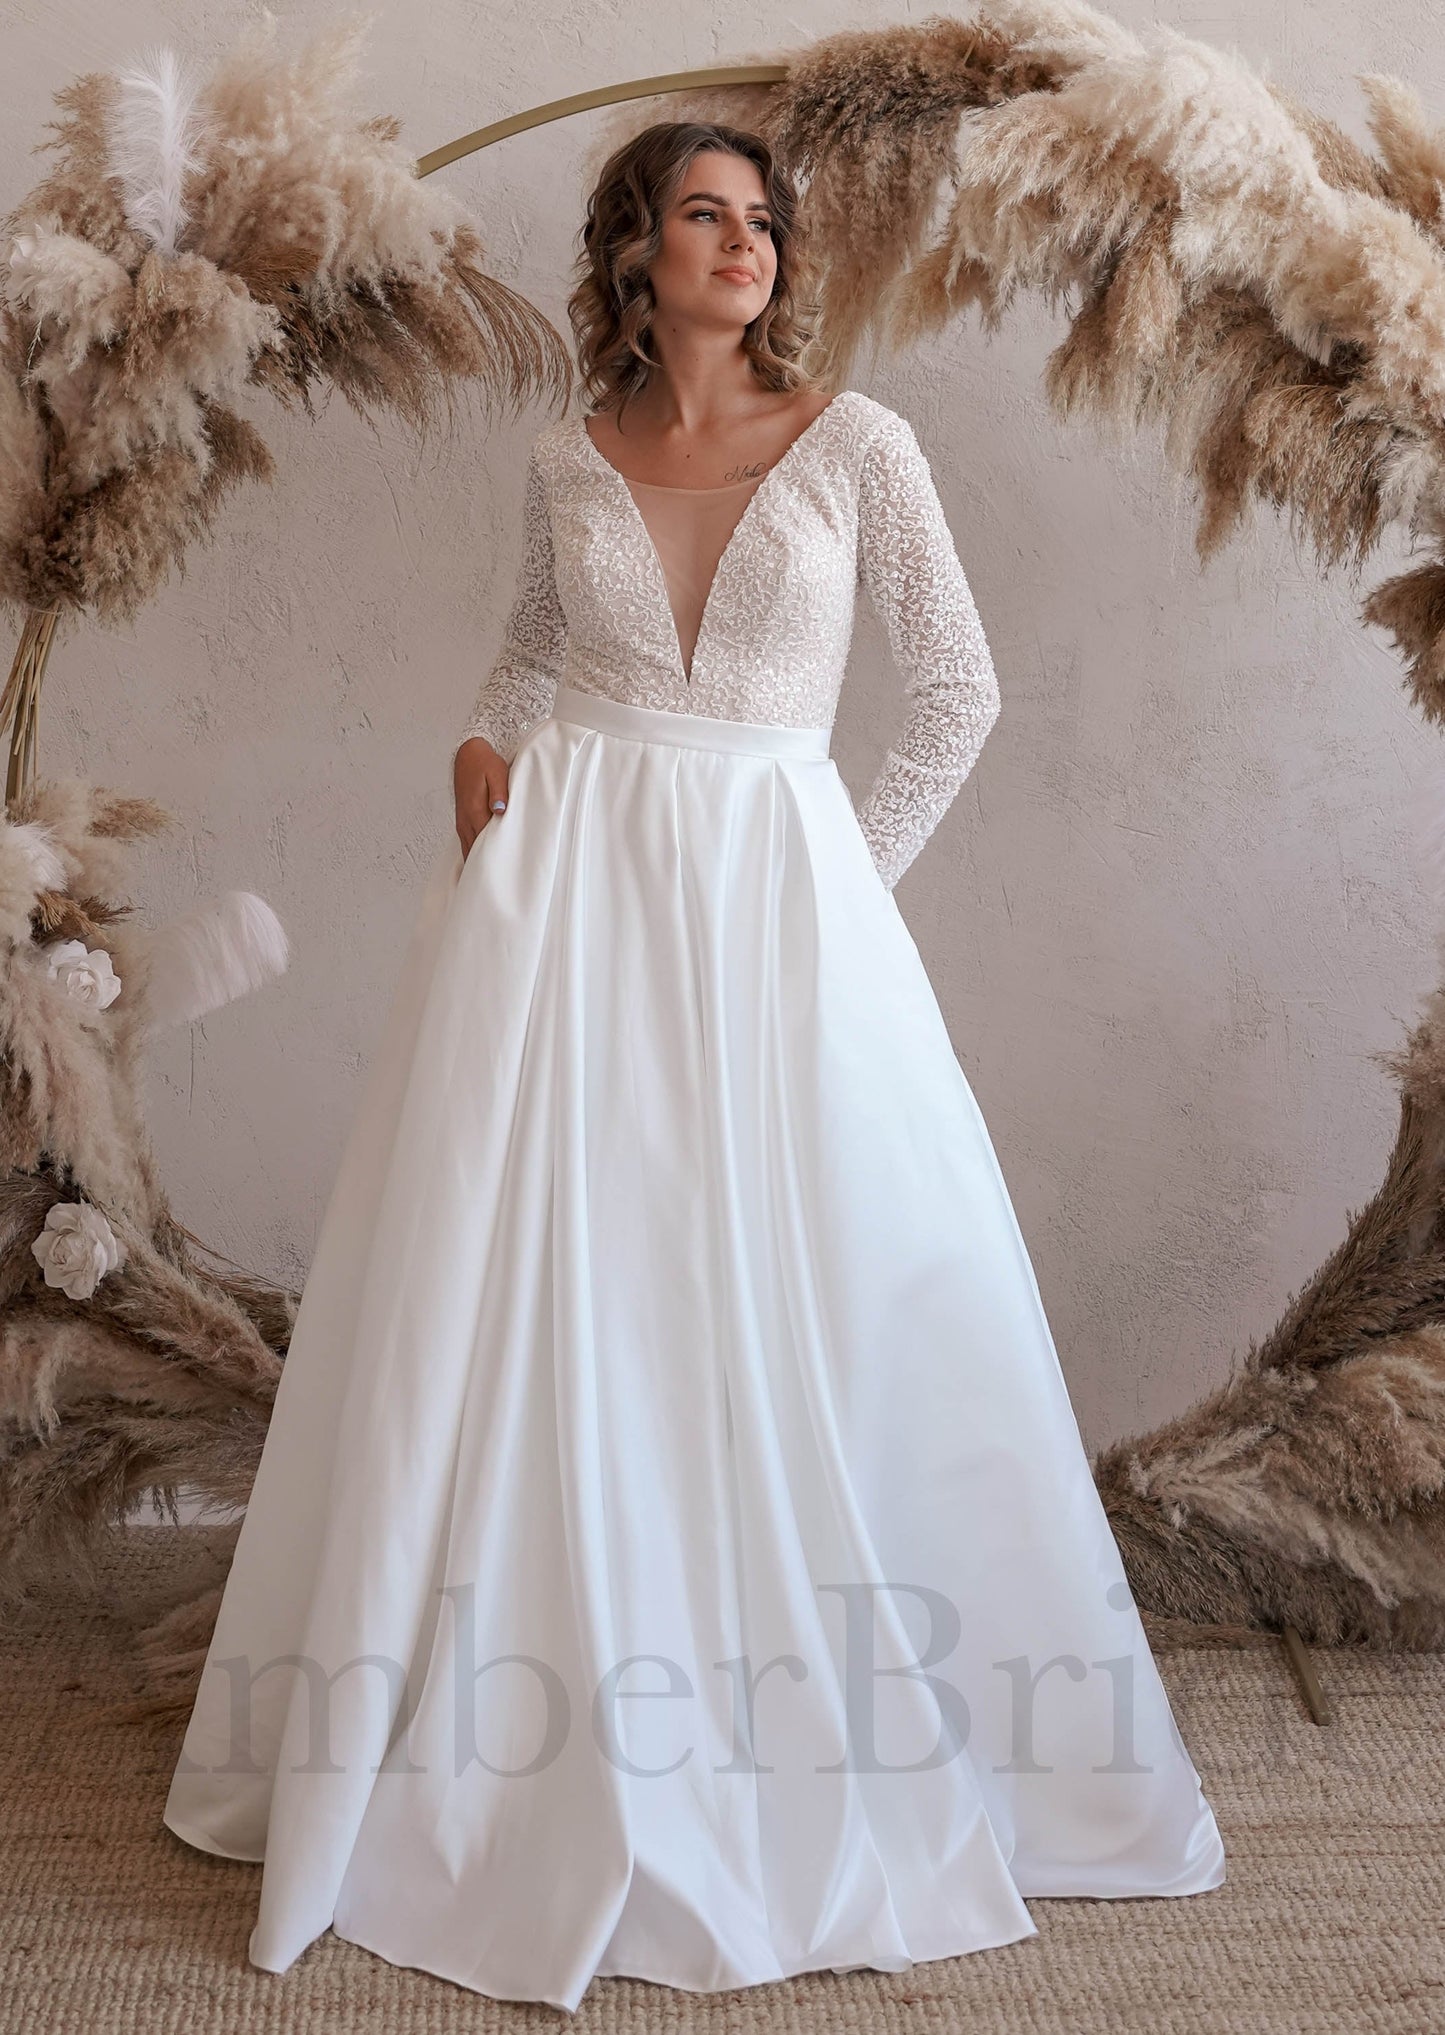 Exclusive A-Line Wedding Dress with Long Sleeve, Deep V-Neck and V-Back